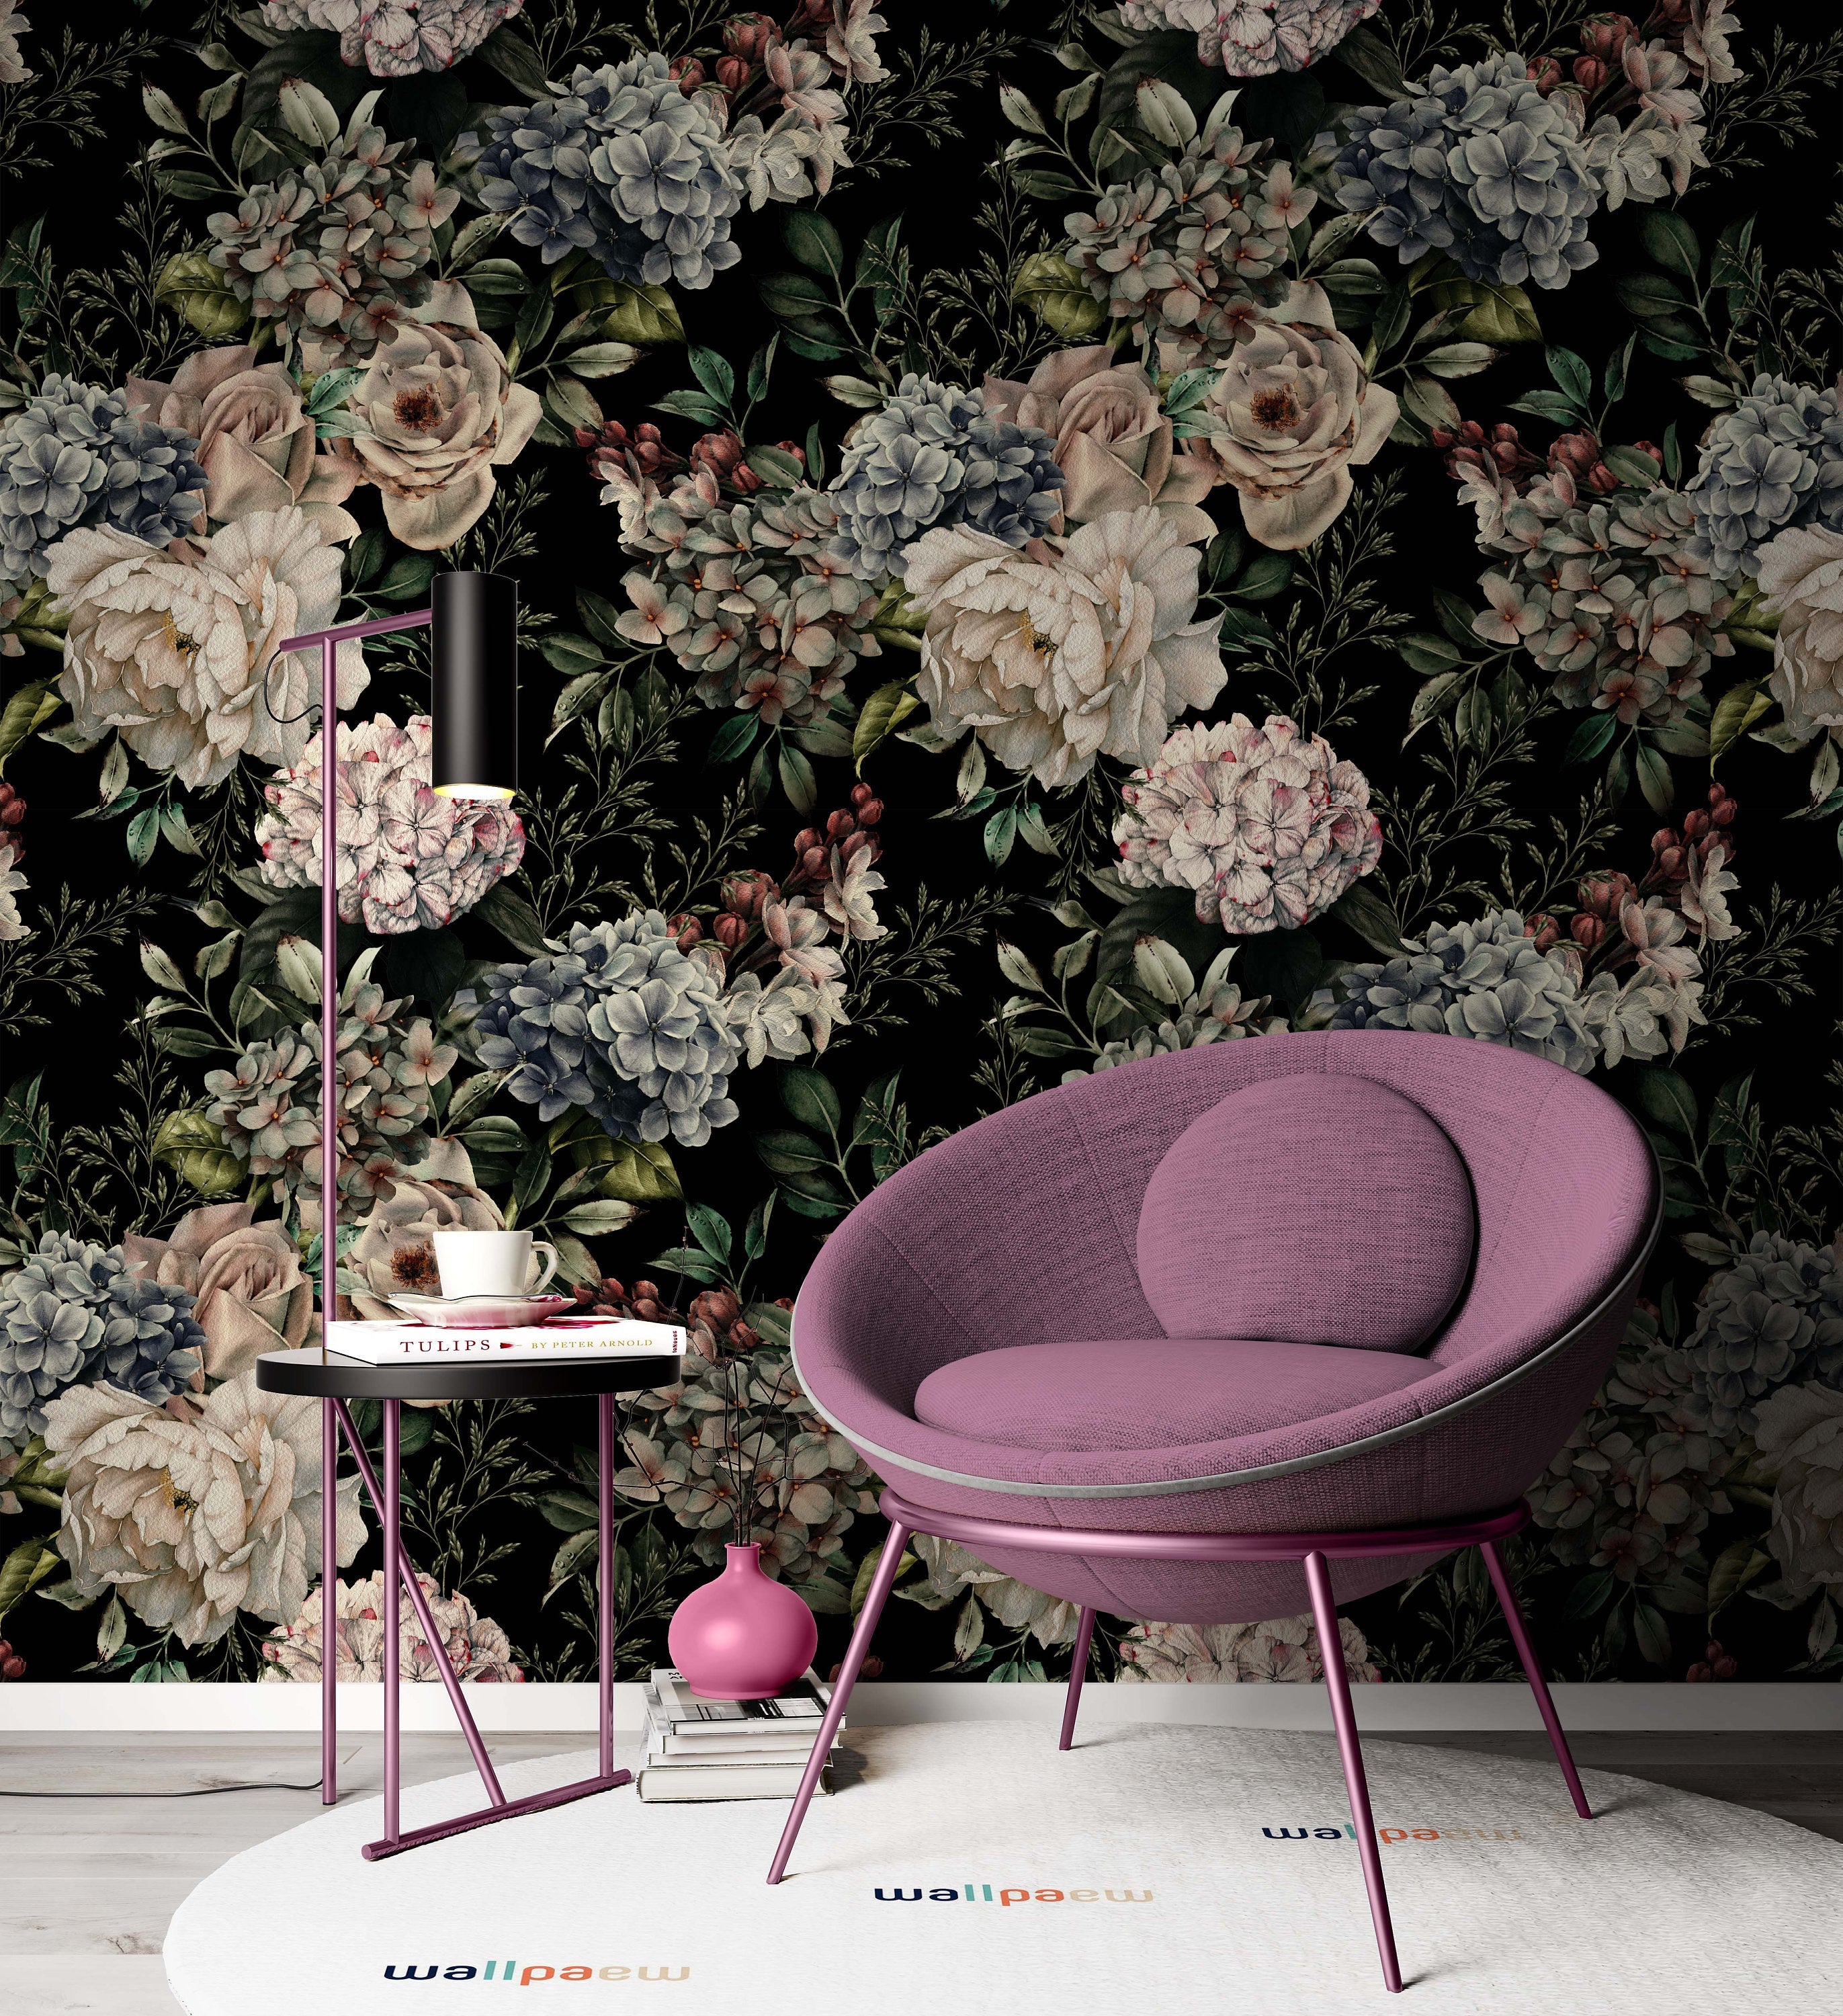 Floral Pattern With Flowers On Dark Background Wallpaper Restaurant Cafe Office Living Room Bedroom Mural Home Wall Art